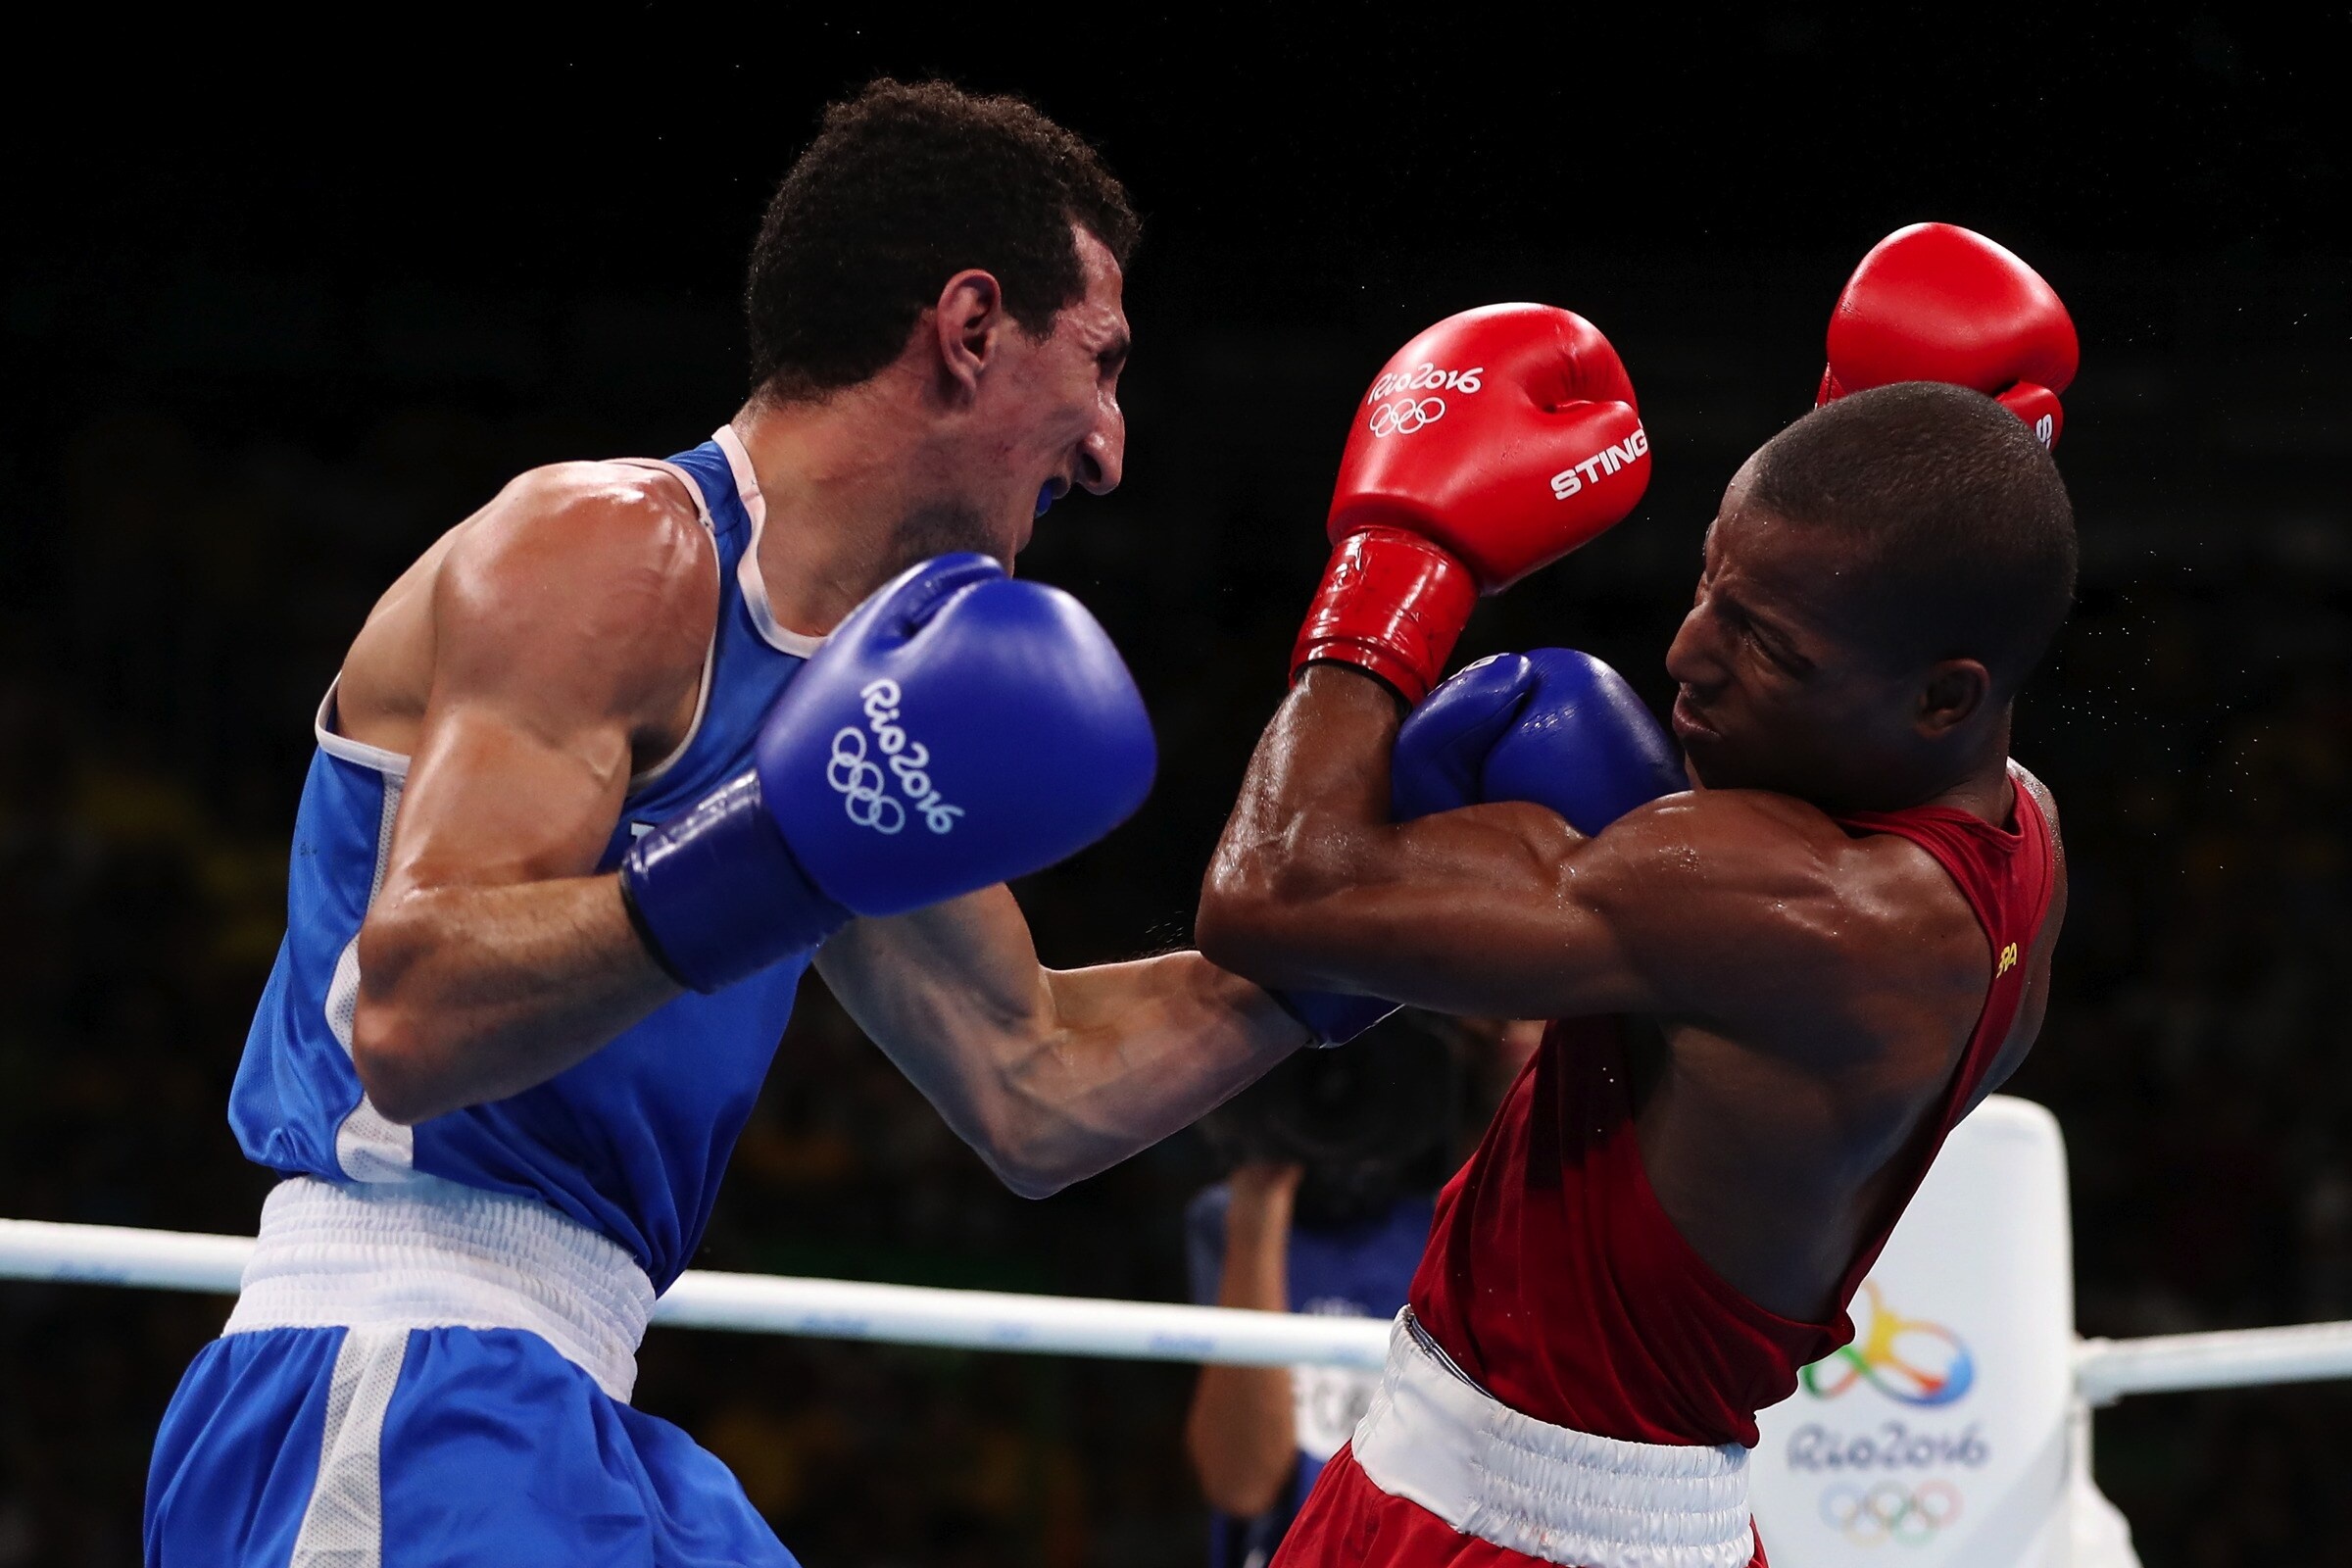 Sofiane Oumiha, Olympic boxing weight category, Lightweight men's division, 2400x1600 HD Desktop